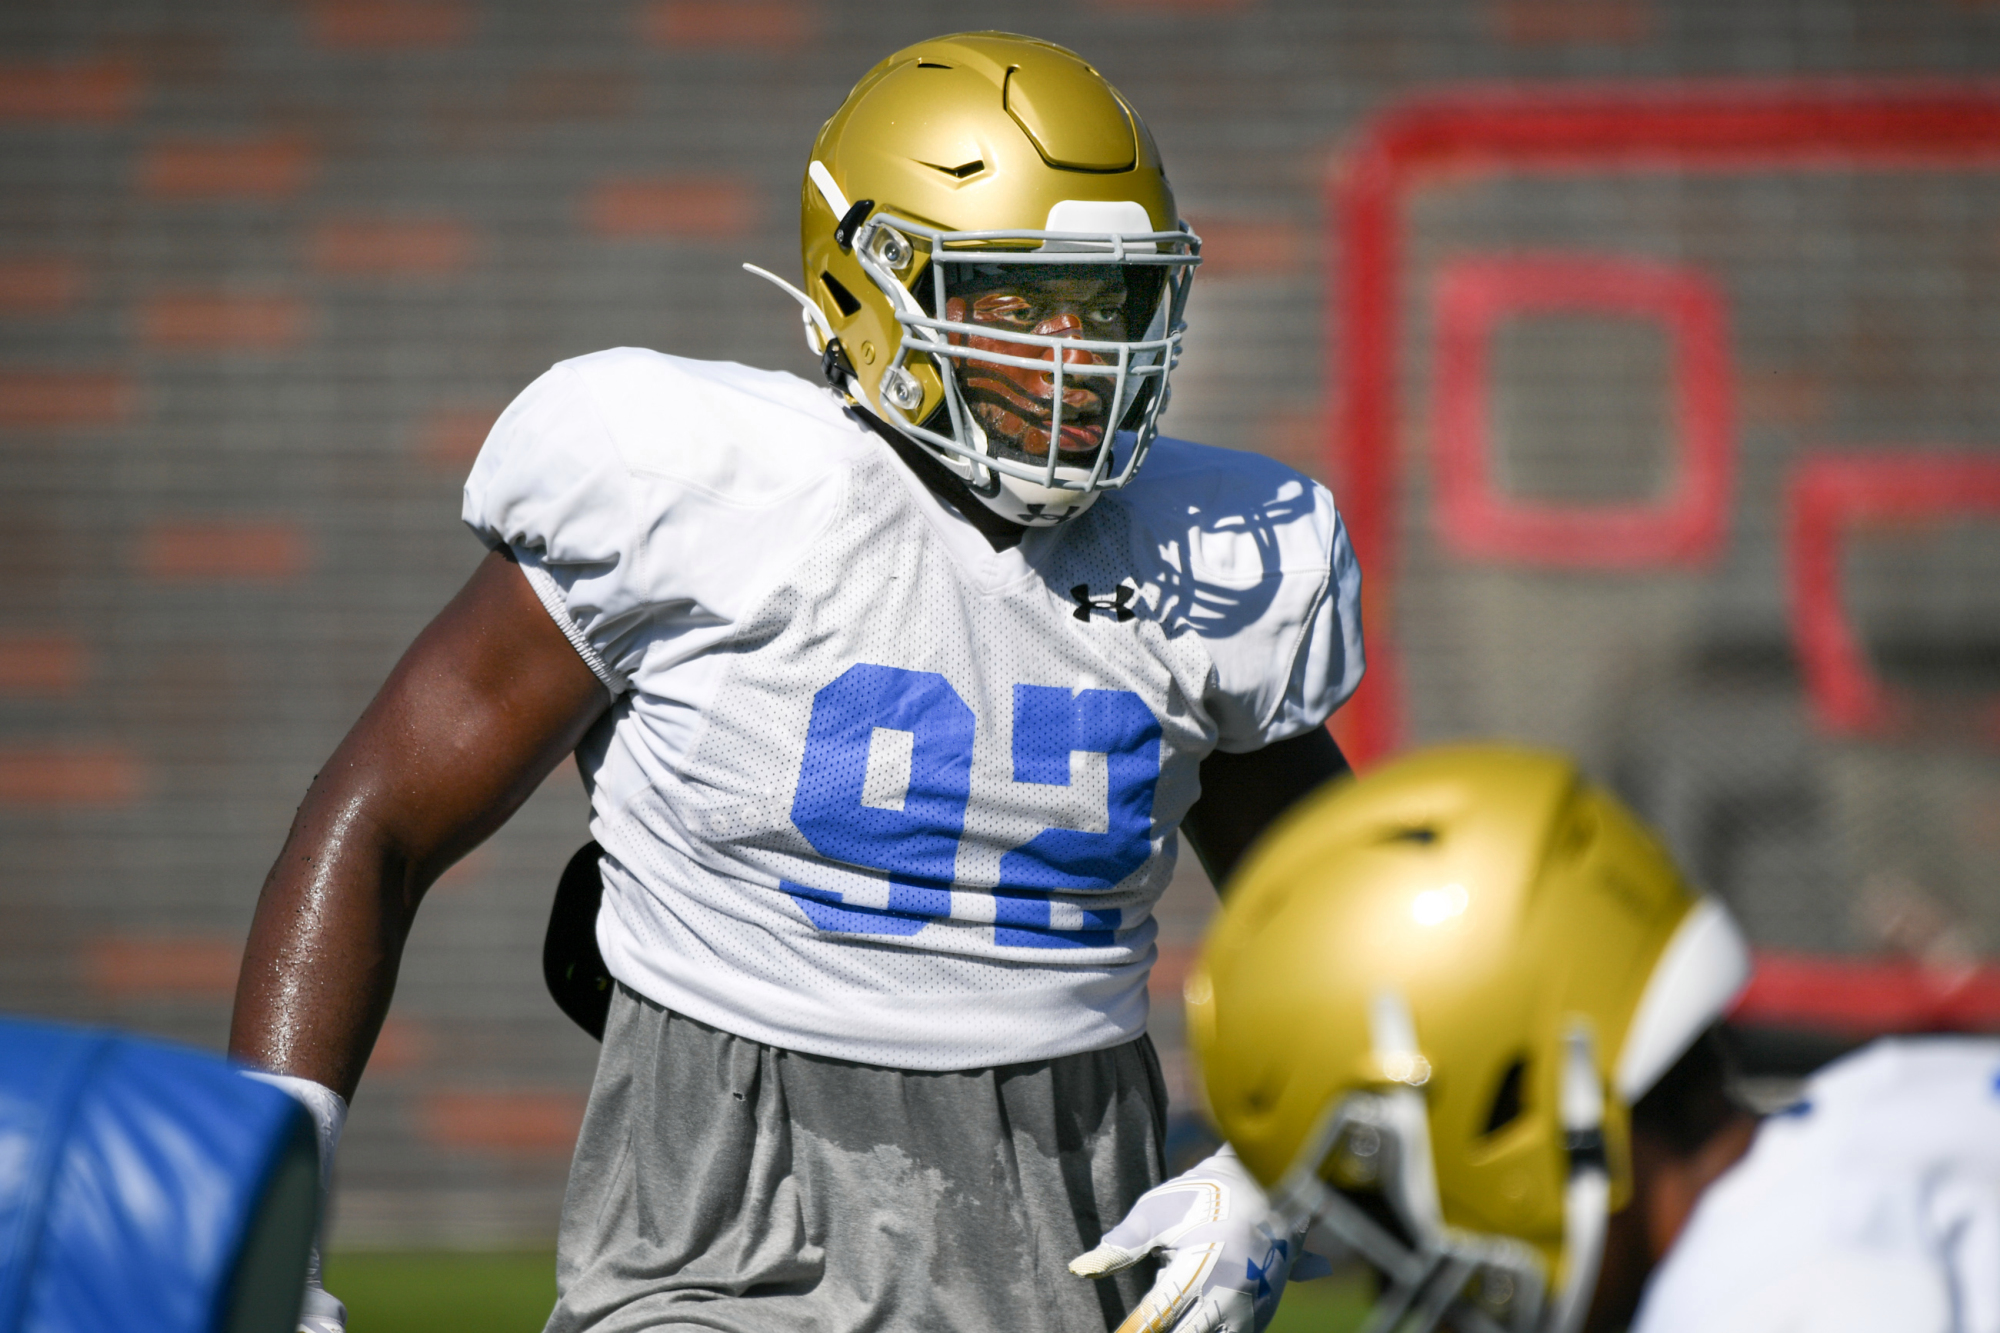 UCLA’s Osa Odighizuwa drafted by Dallas Cowboys in 3rd round Orange